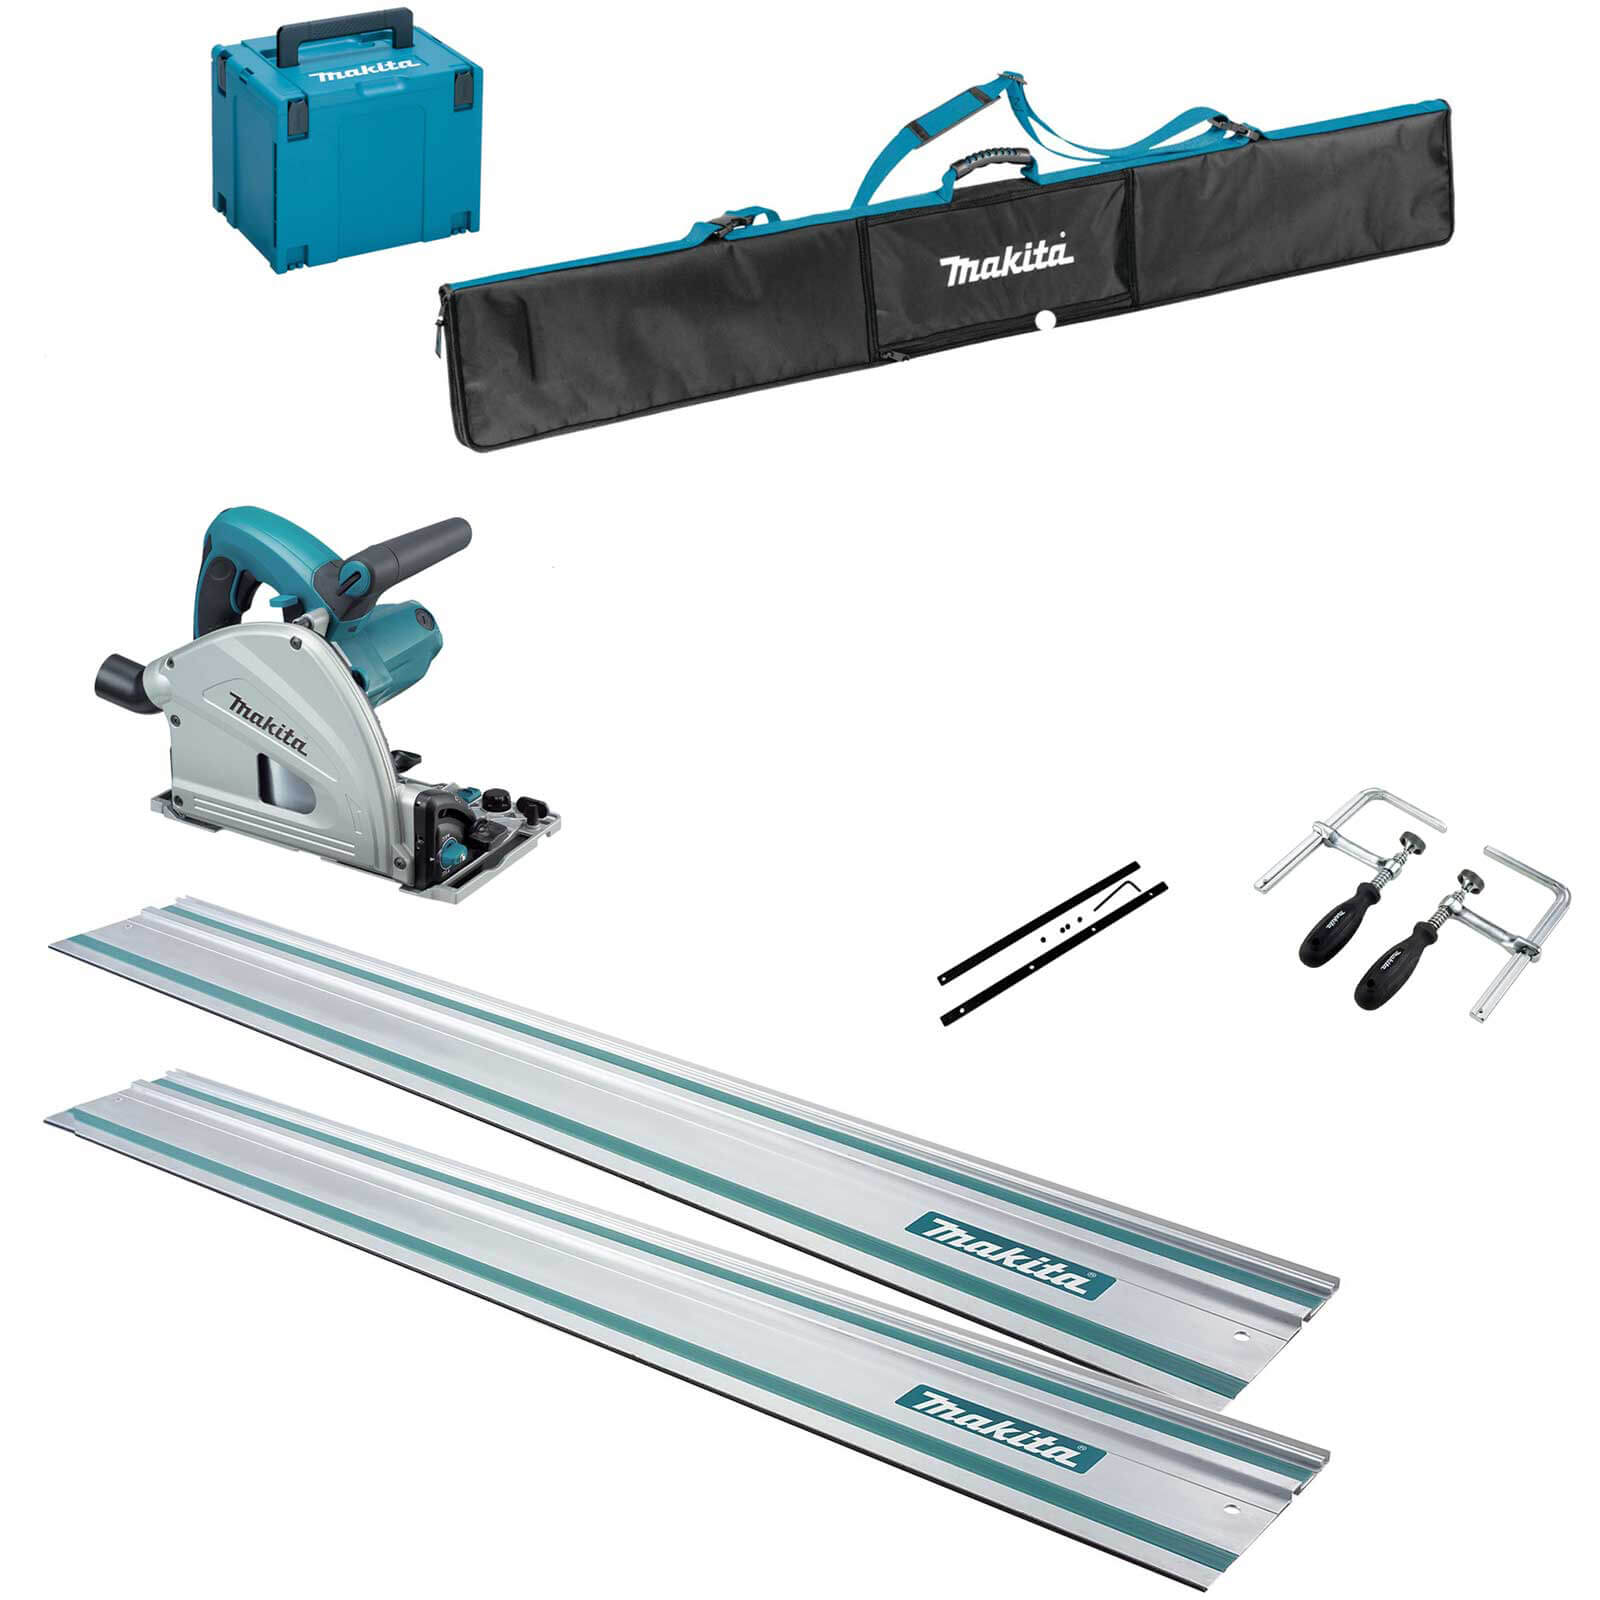 Makita SP6000K6 Plunge Cut Circular Saw and Guide Rail Accessory 6 Piece Set 110v